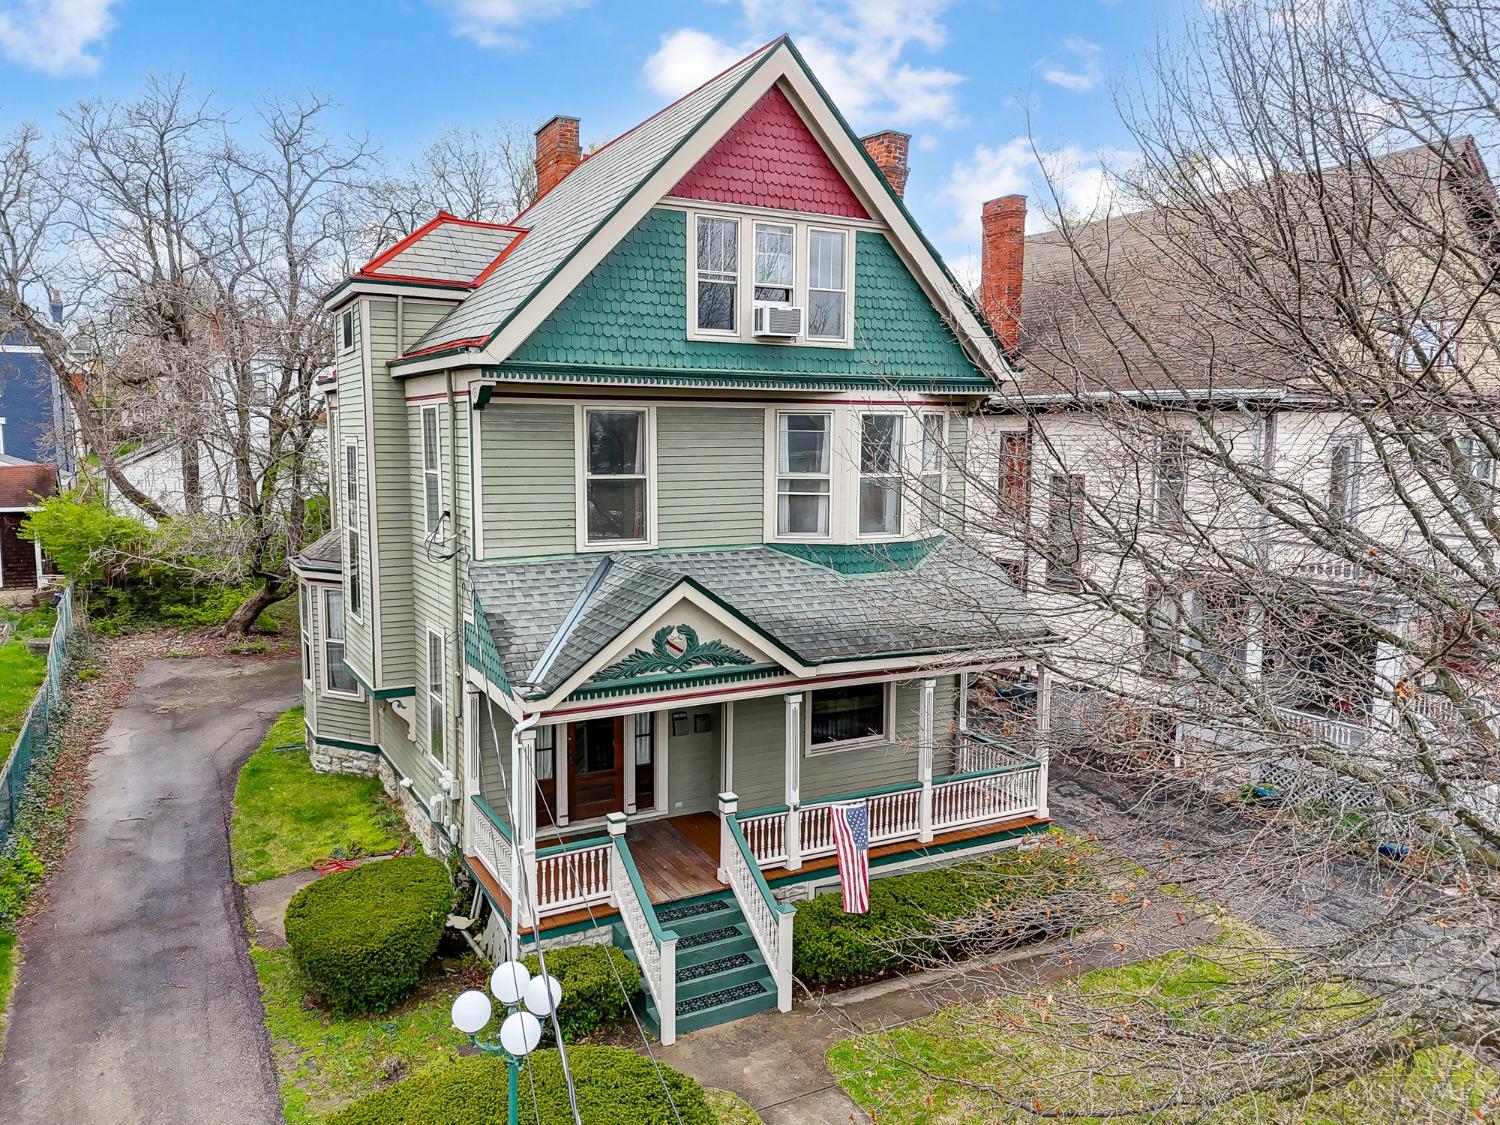 Incredible Historic Victorian in the heart of the Incline District of East Price Hill filled with character and charm. It boasts views of the City from the top floor, a gorgeous banister staircase, natural woodwork, pocket doors, hardwood floors, decorative fireplaces, charming light fixtures, stain glass windows, abundant natural light, and ample room to relax and entertain.  This 5 bedroom 4 full bathroom home is close to the entertainment area, parks and restaurants in the Incline District and minutes to downtown Cincinnati and all major highways.  This gem is tax abated through TY2025!